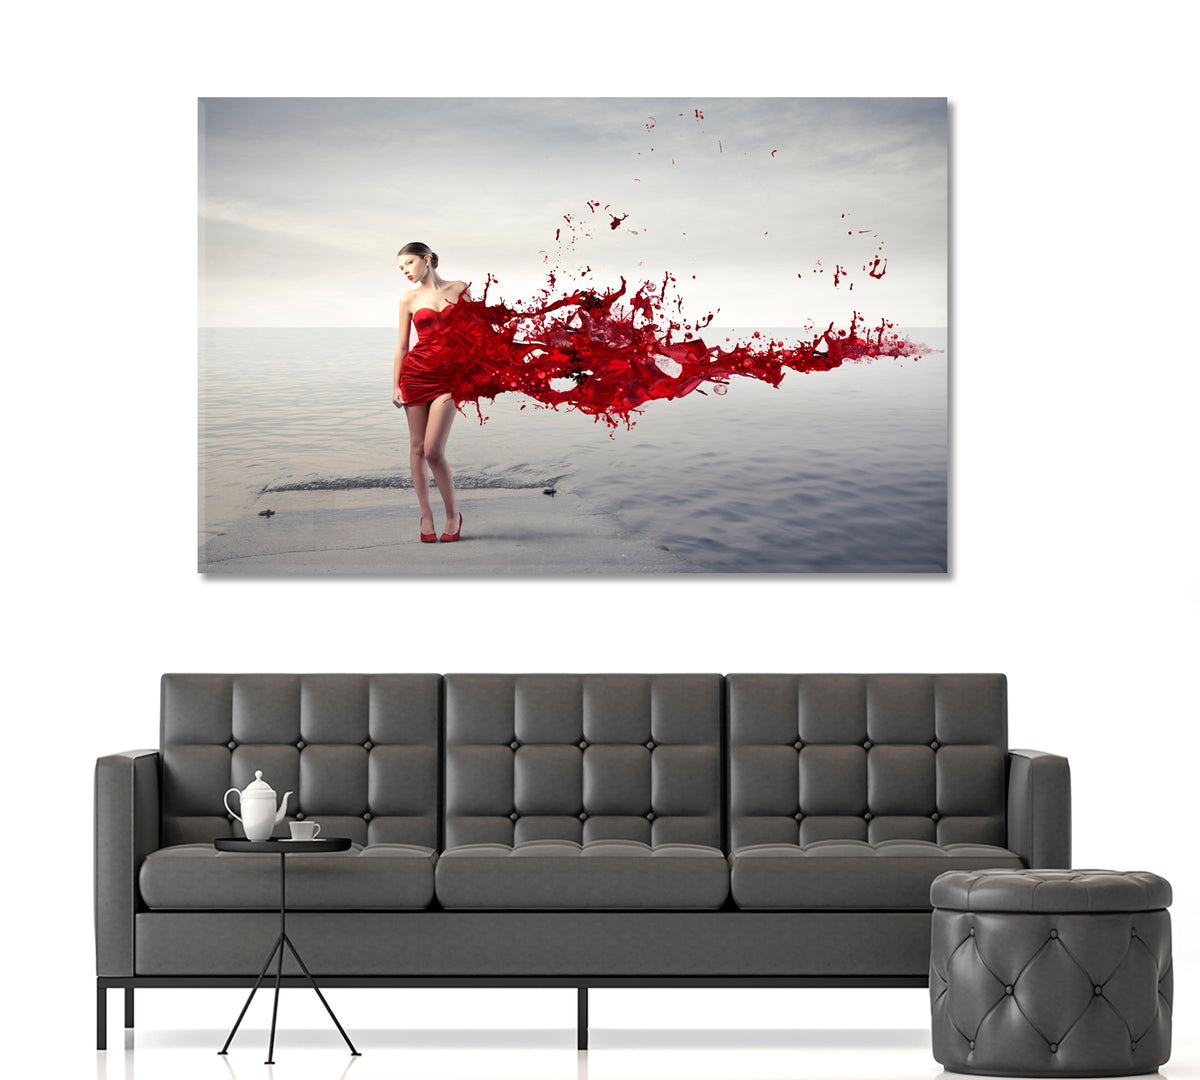 LADY IN RED Beautiful Woman on Pier Vintage Affordable Canvas Print Artesty 1 panel 24" x 16" 